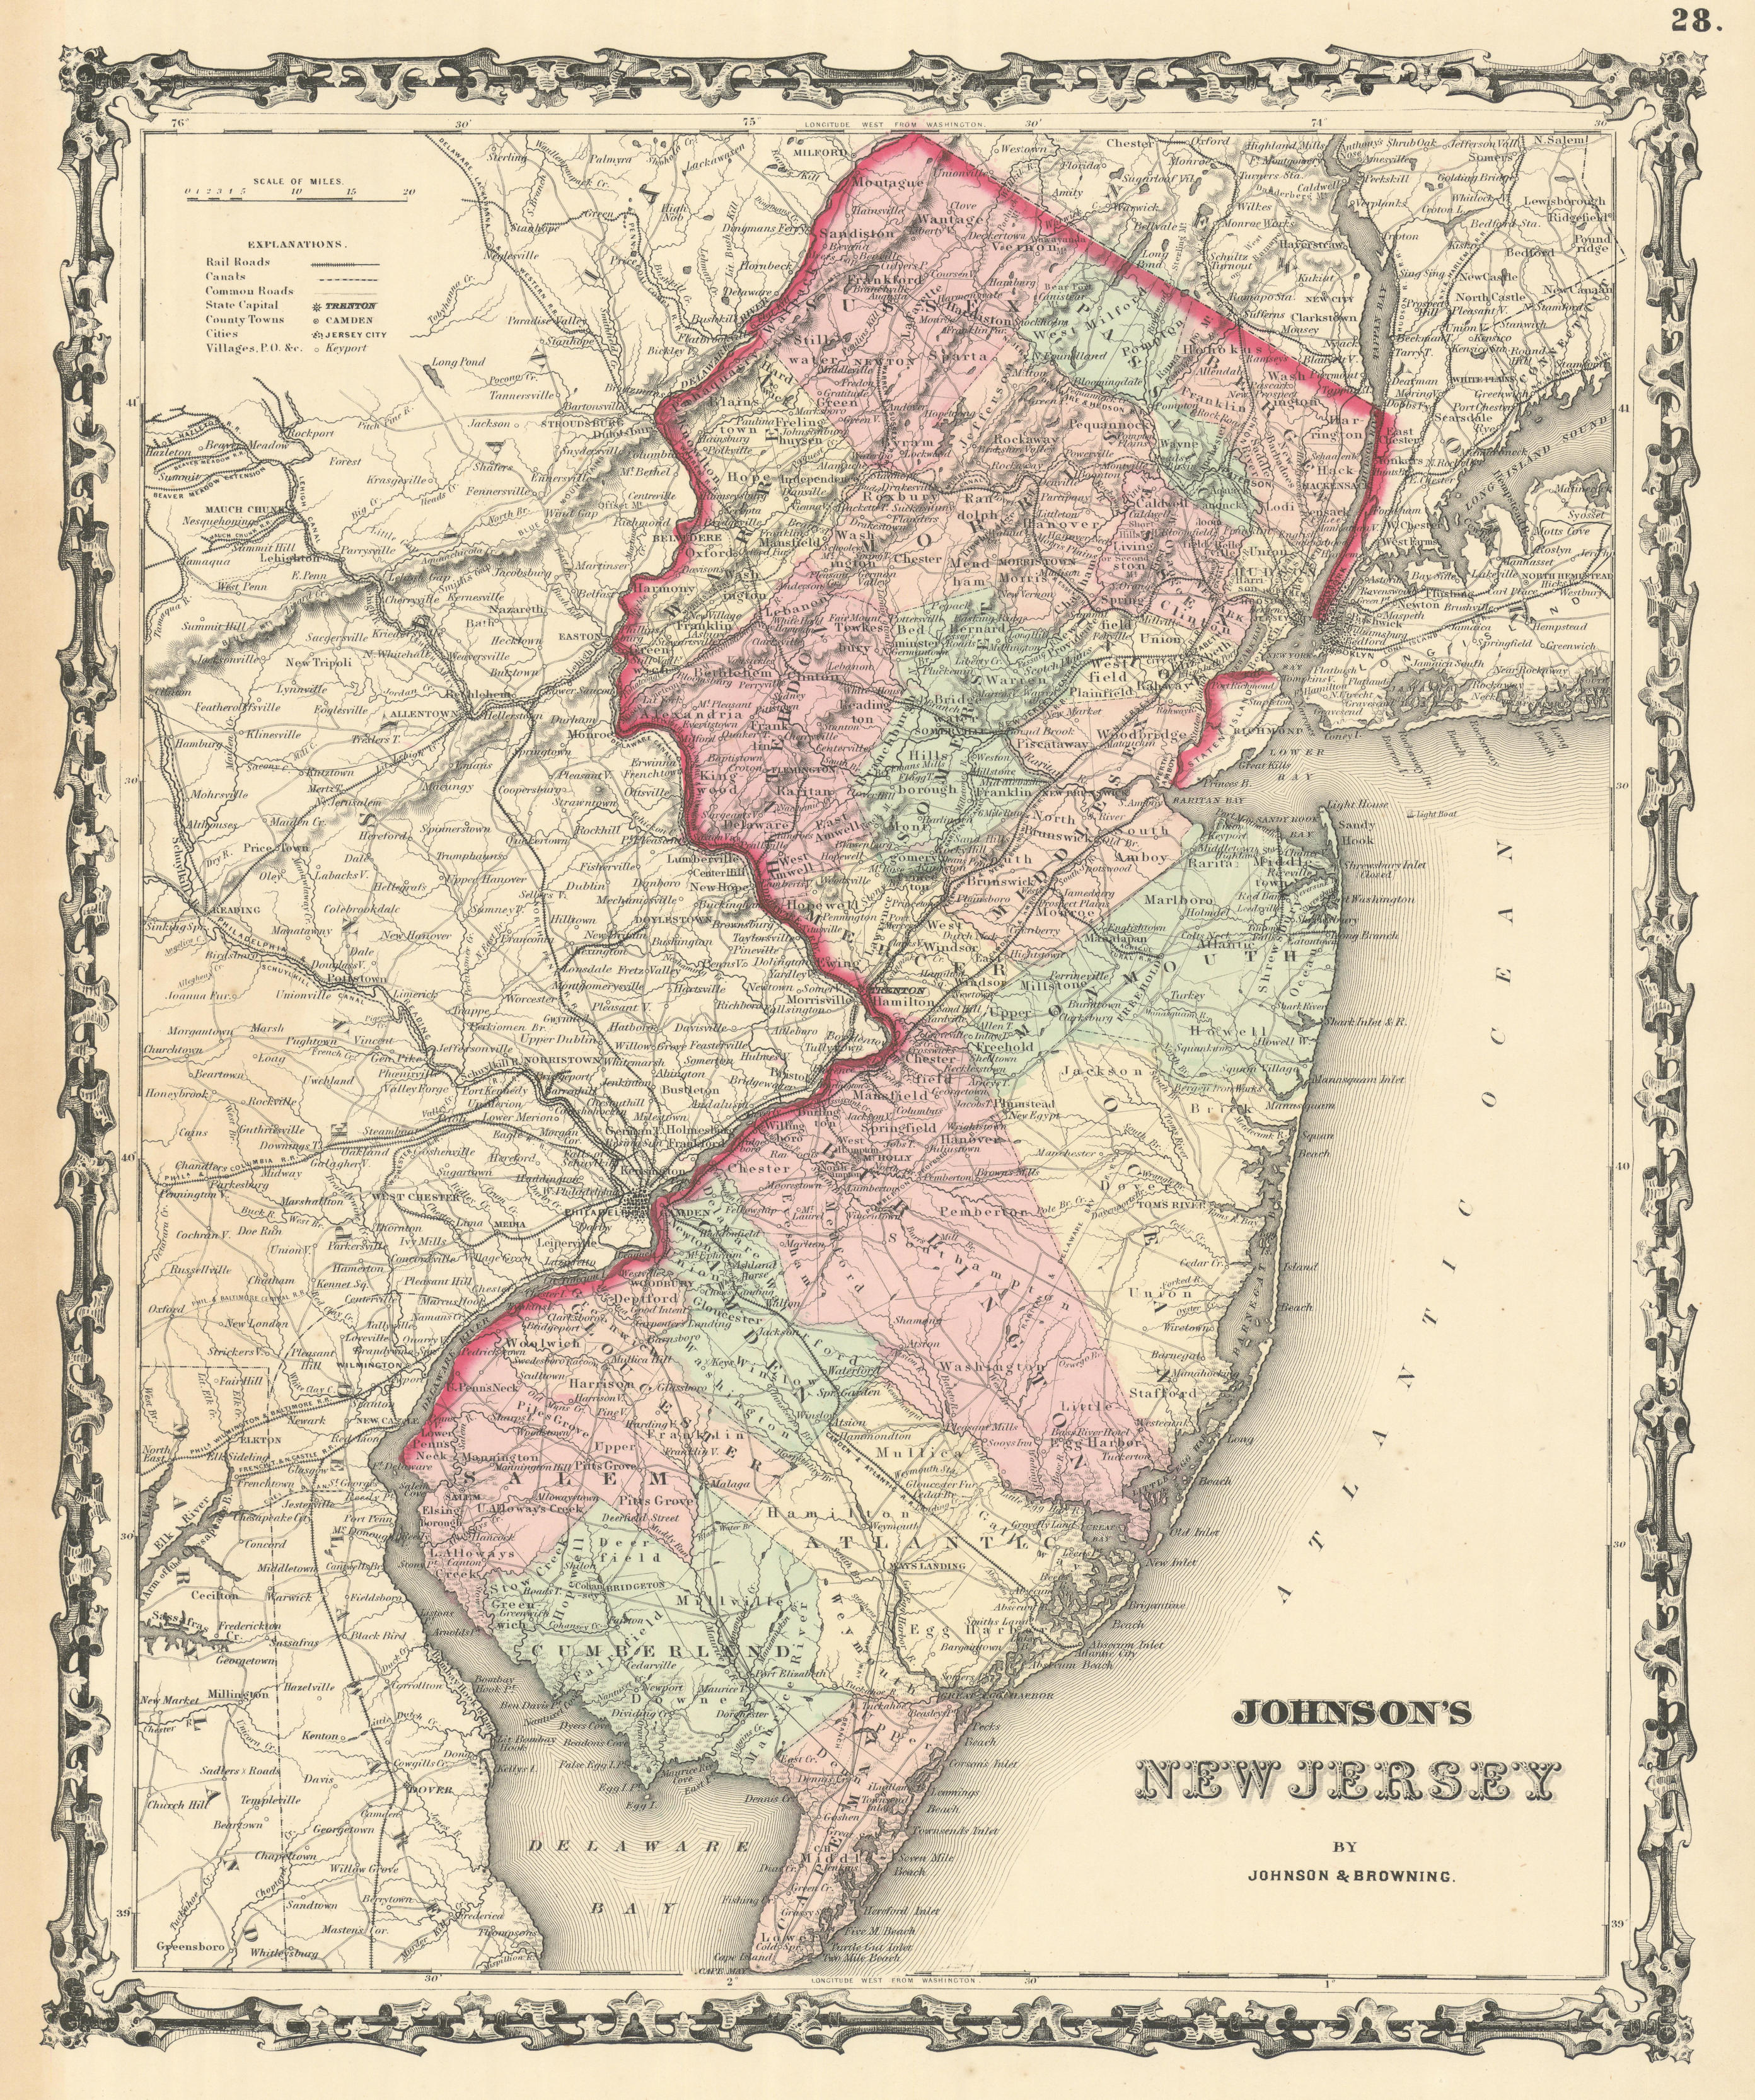 Associate Product Johnson's New Jersey. US State map showing counties 1861 old antique chart